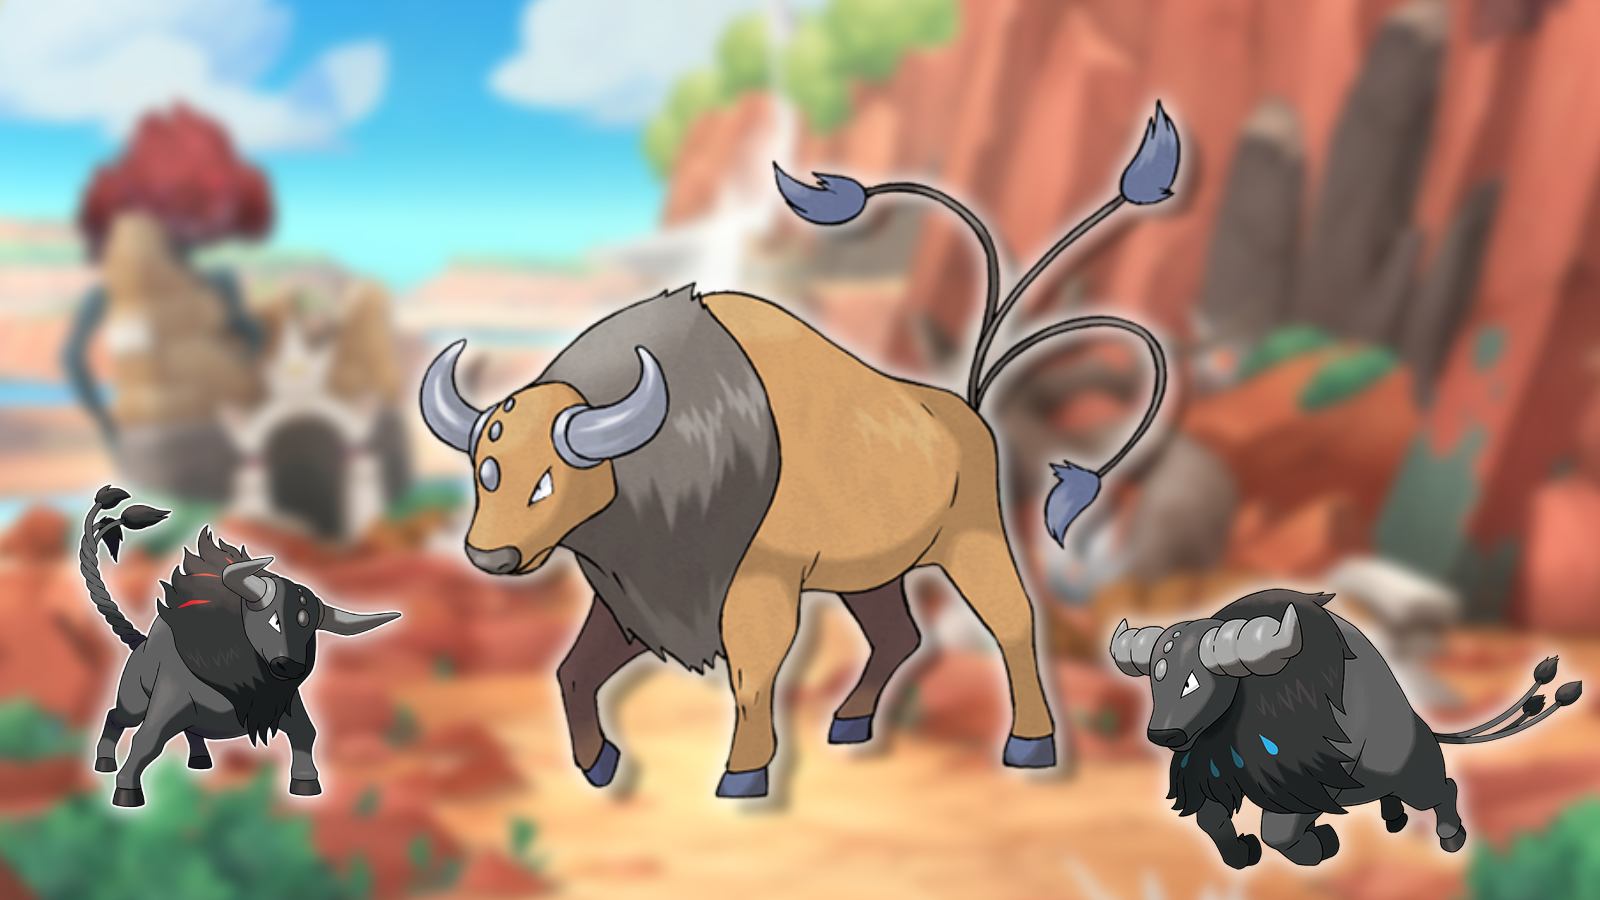 The Pokemon Tauros and Paldean Tauros appear against a blurred background